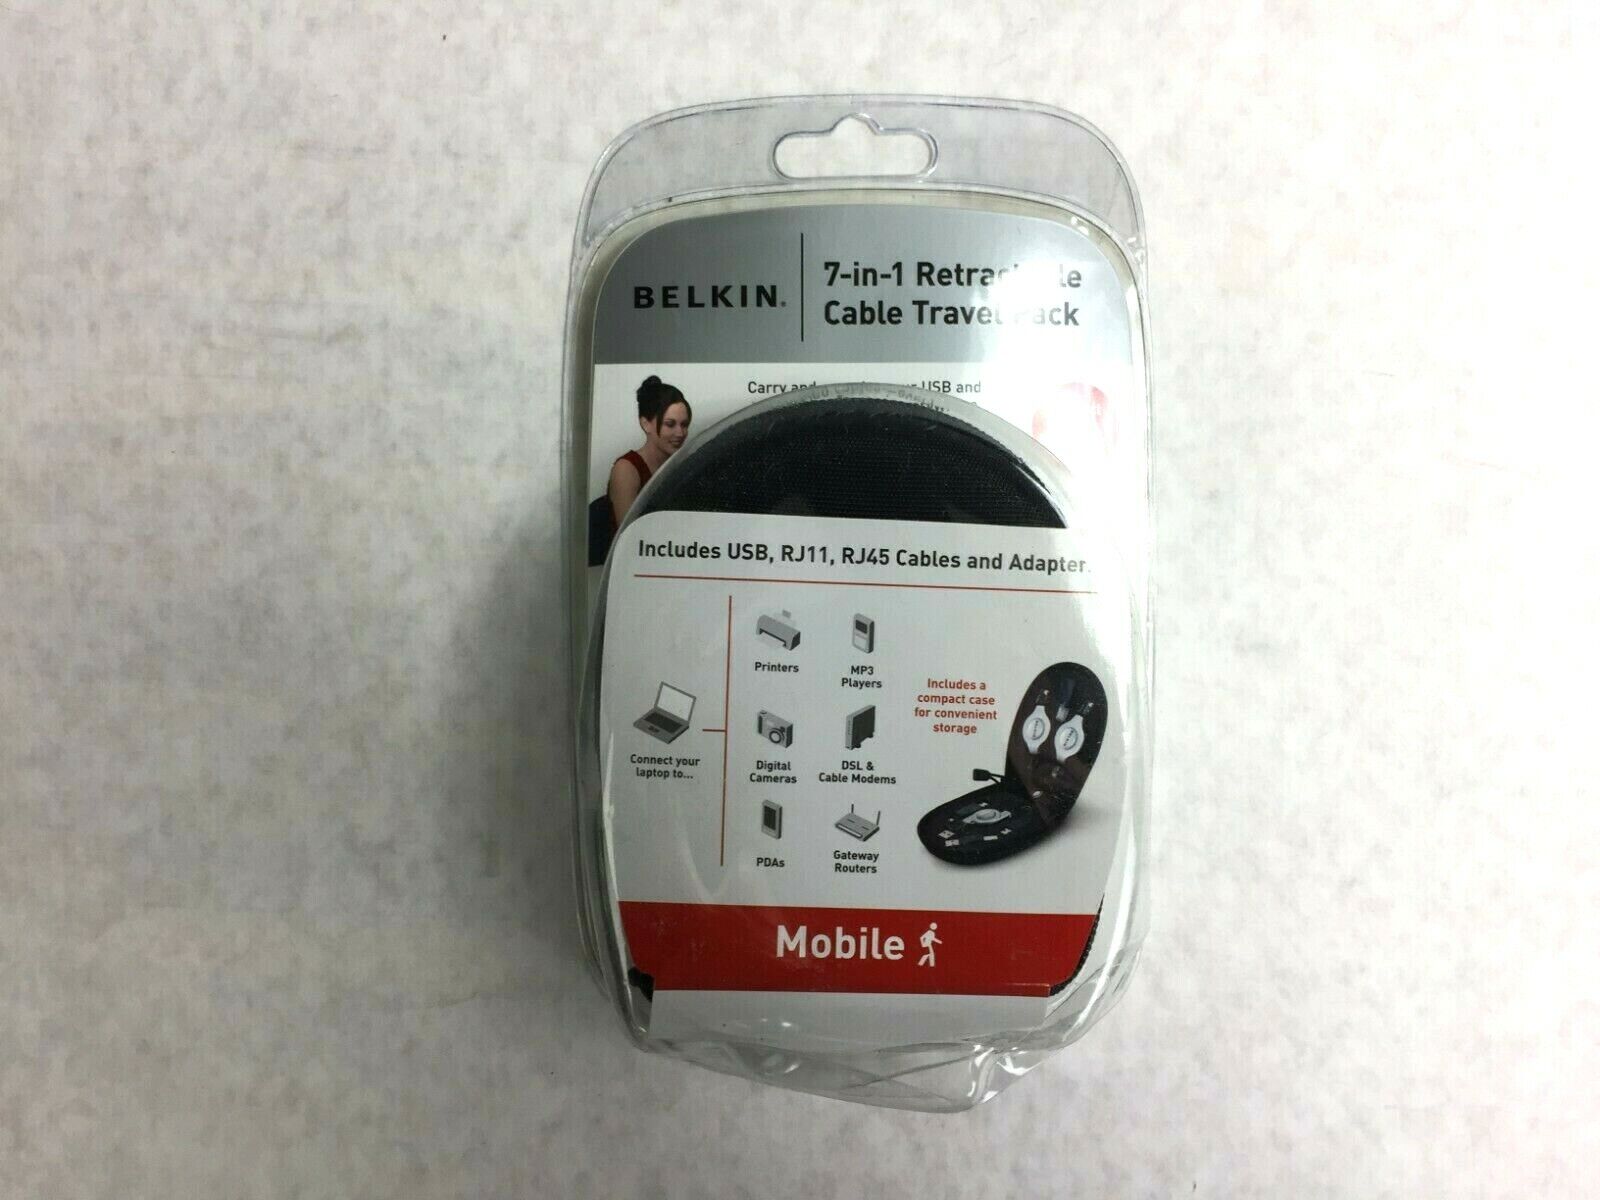 Belkin 7-in-1 Retractable Cable Travel Pack F3X1724 New In Case